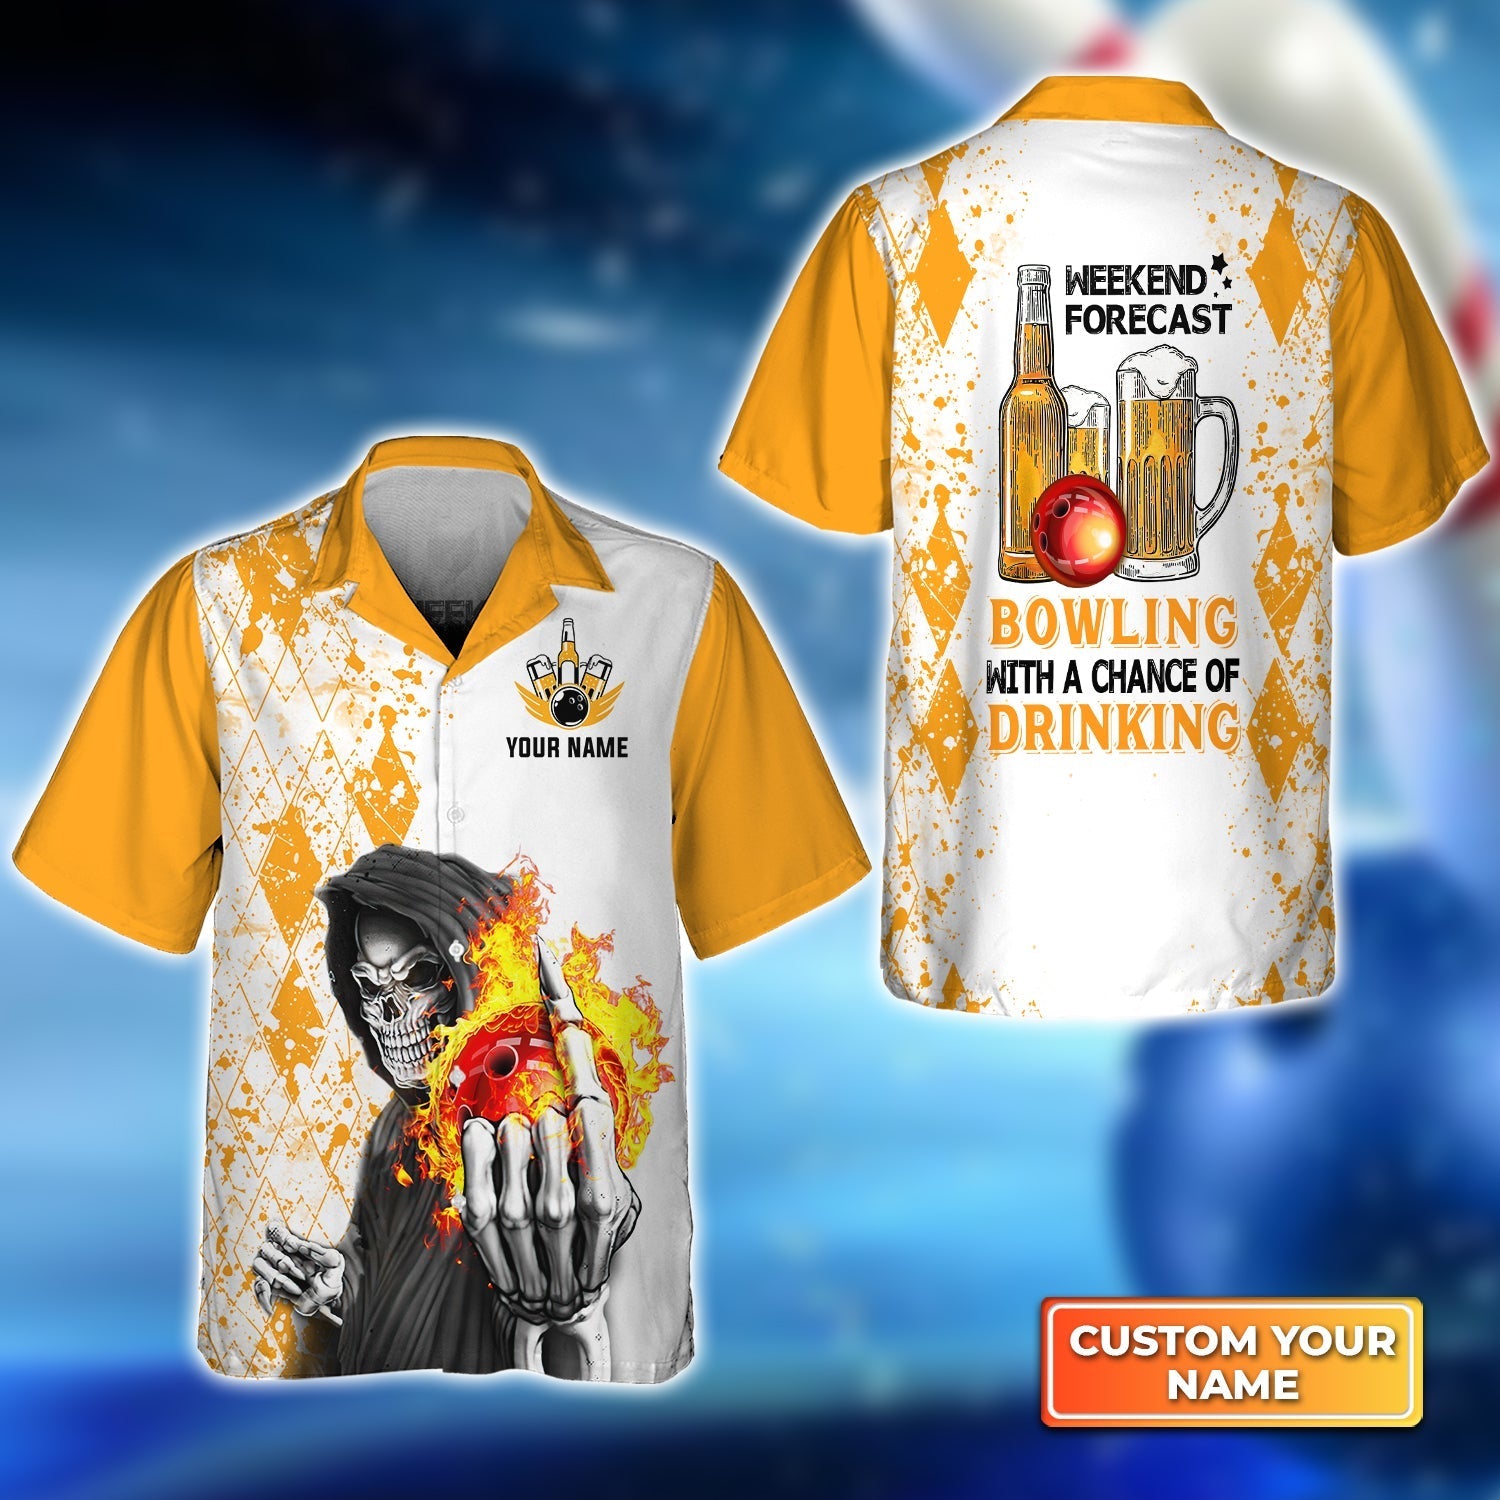 Weekend Forecast Bowling With A Big Chance of Drinking Personalized Name 3D Hawaiian Shirt